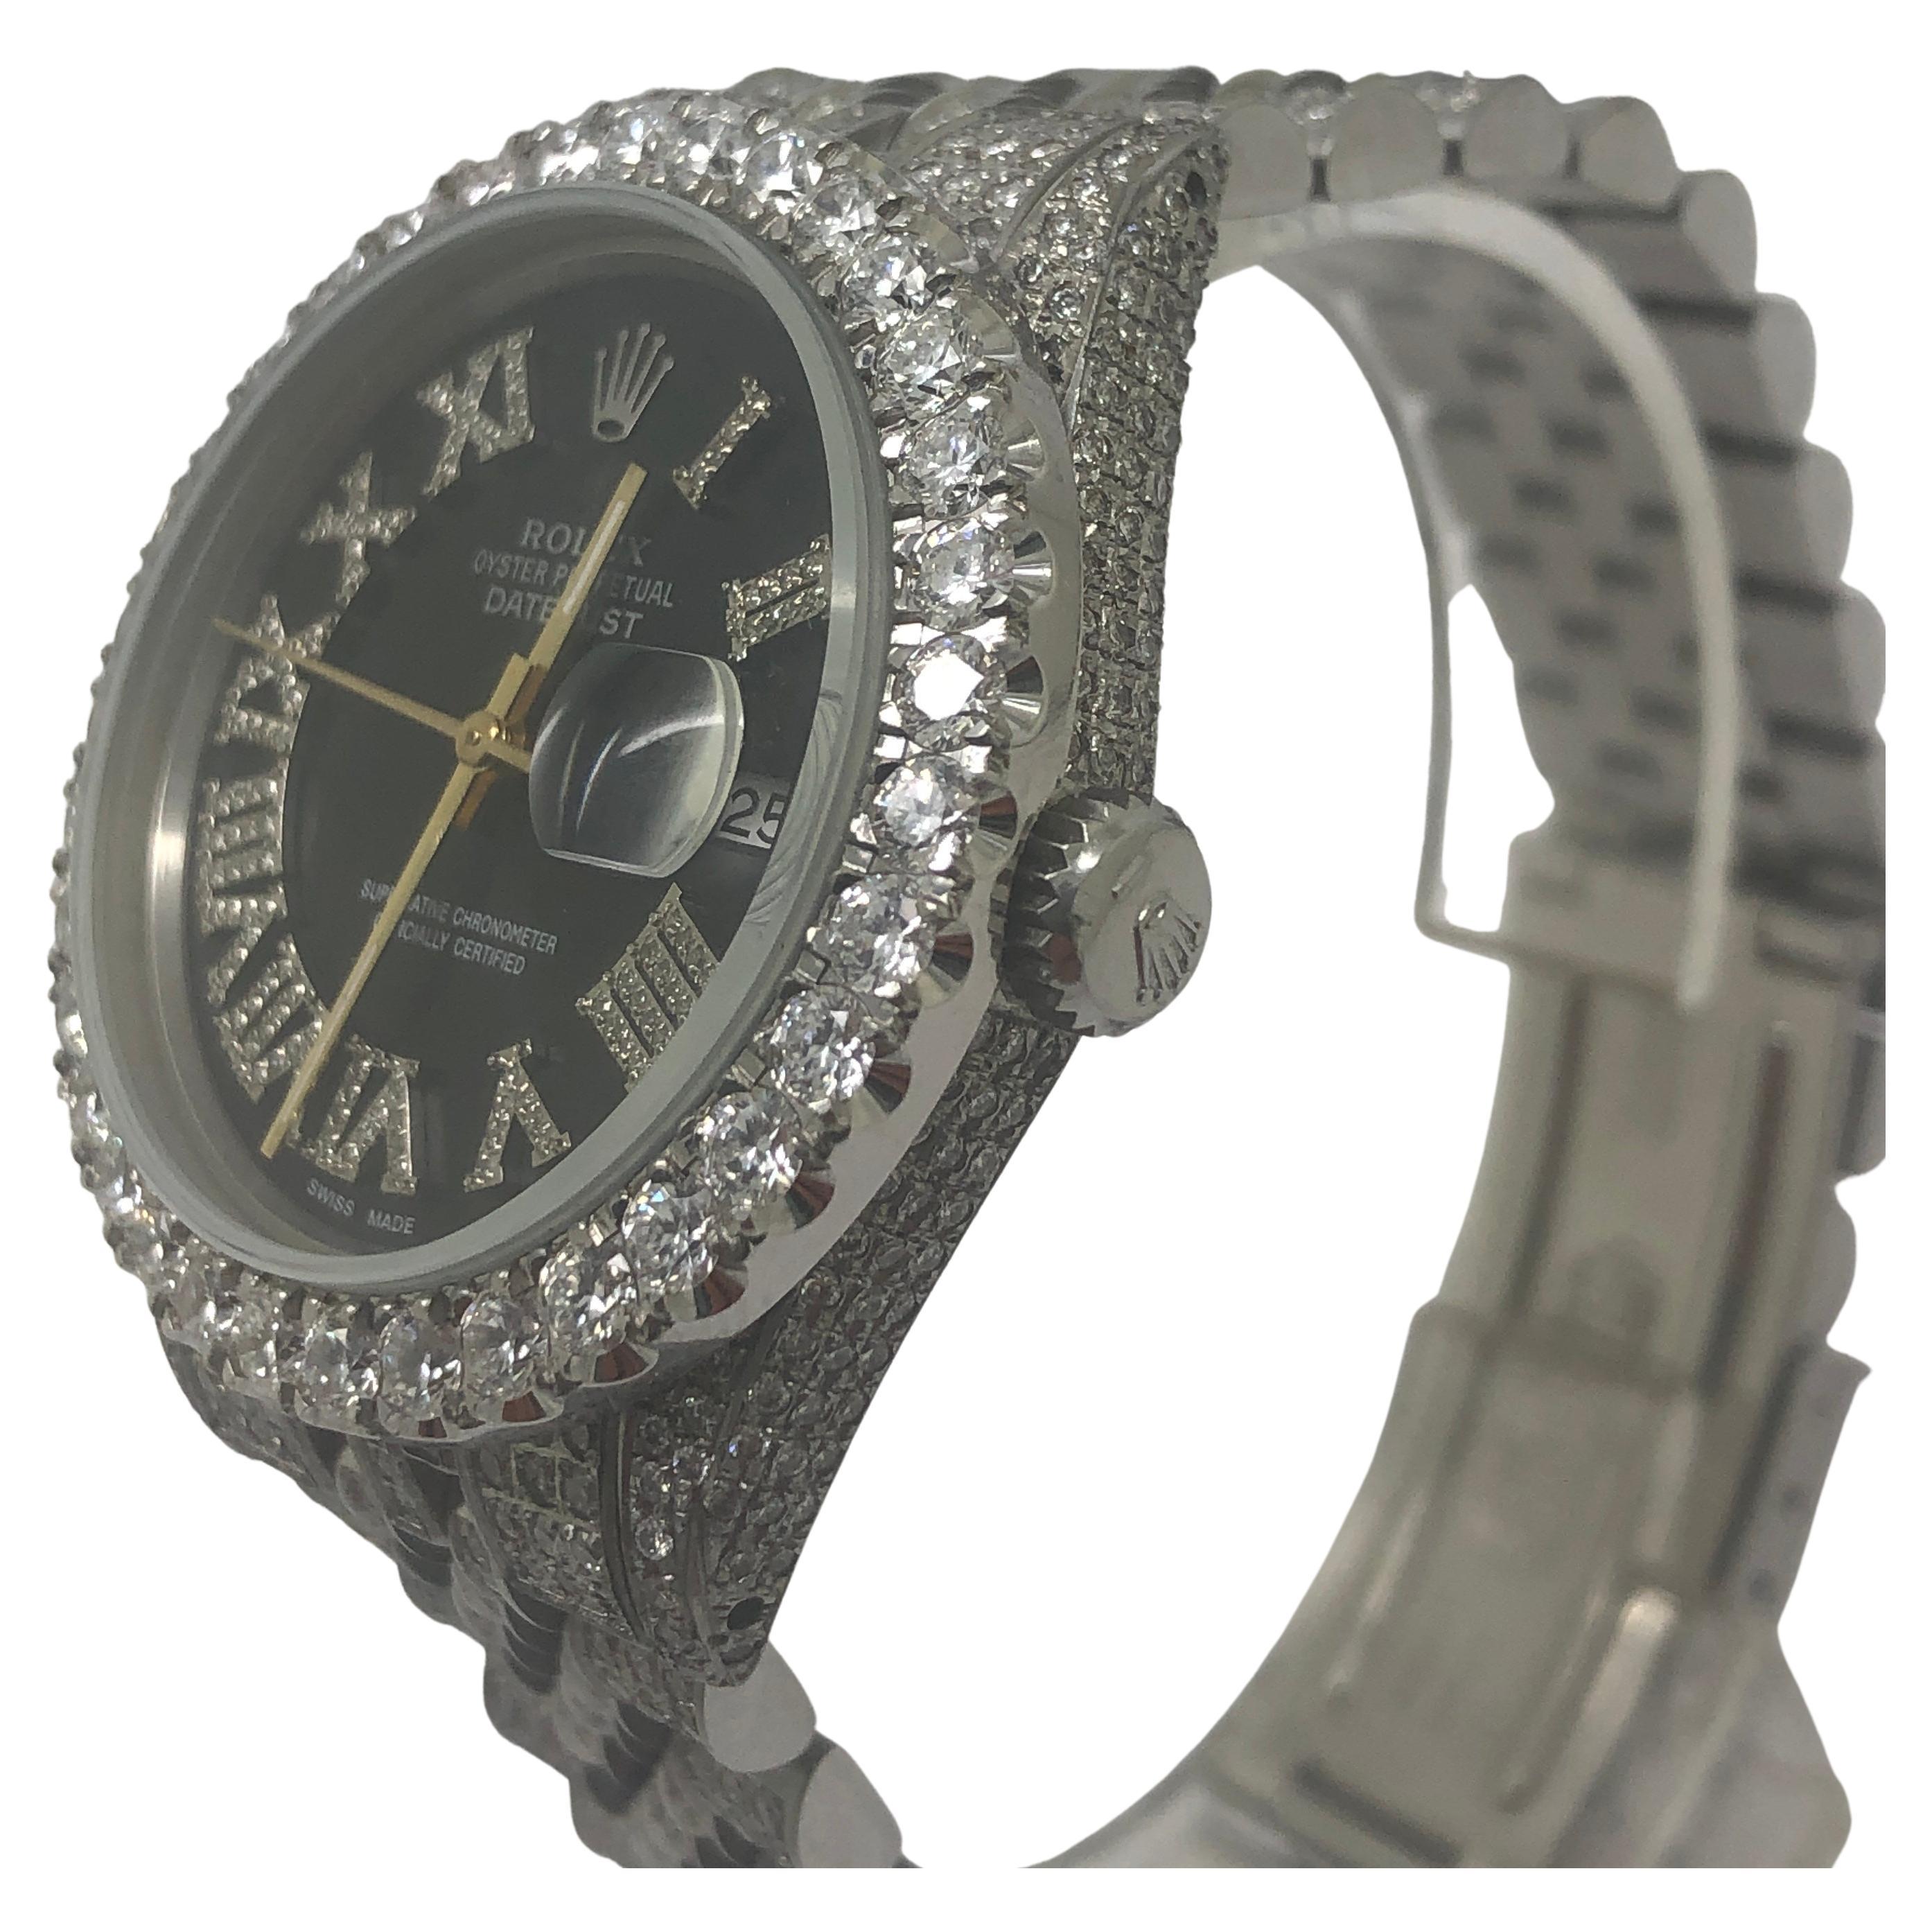 100% Authentic Rolex Datejust Iced out completely with collection quality vs white natural diamonds

8 carats in collection quality diamonds   Bezel has 10 pointers  F VVS quality 100% Natural
watch's customization means it cannot be serviced nor